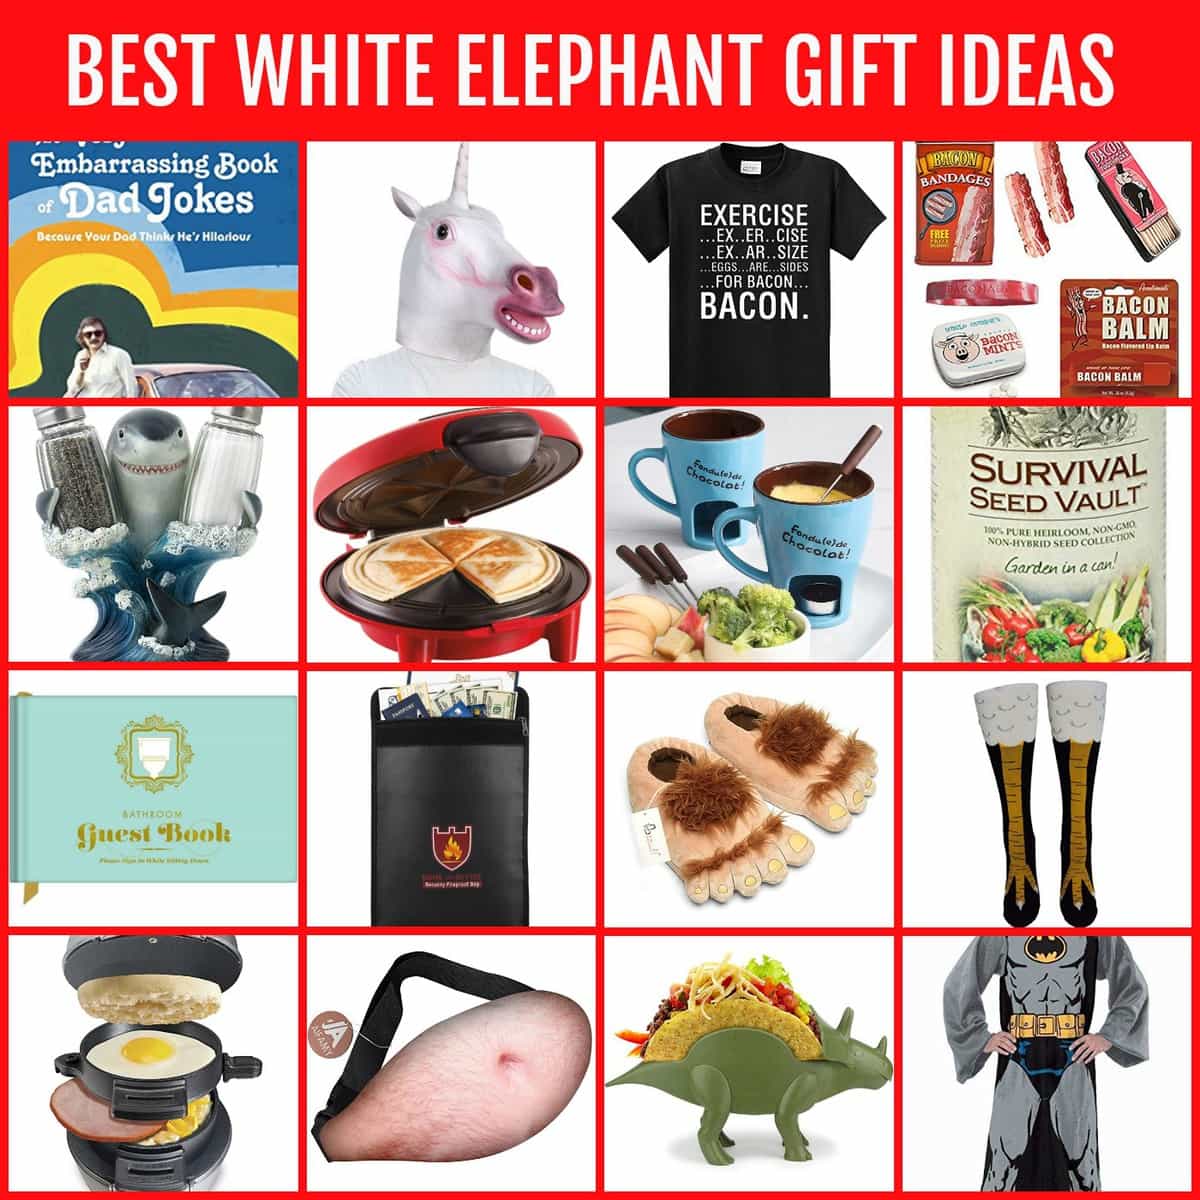 https://letsdiyitall.com/wp-content/uploads/2018/12/white-elephant-gifts-square-collage.jpg